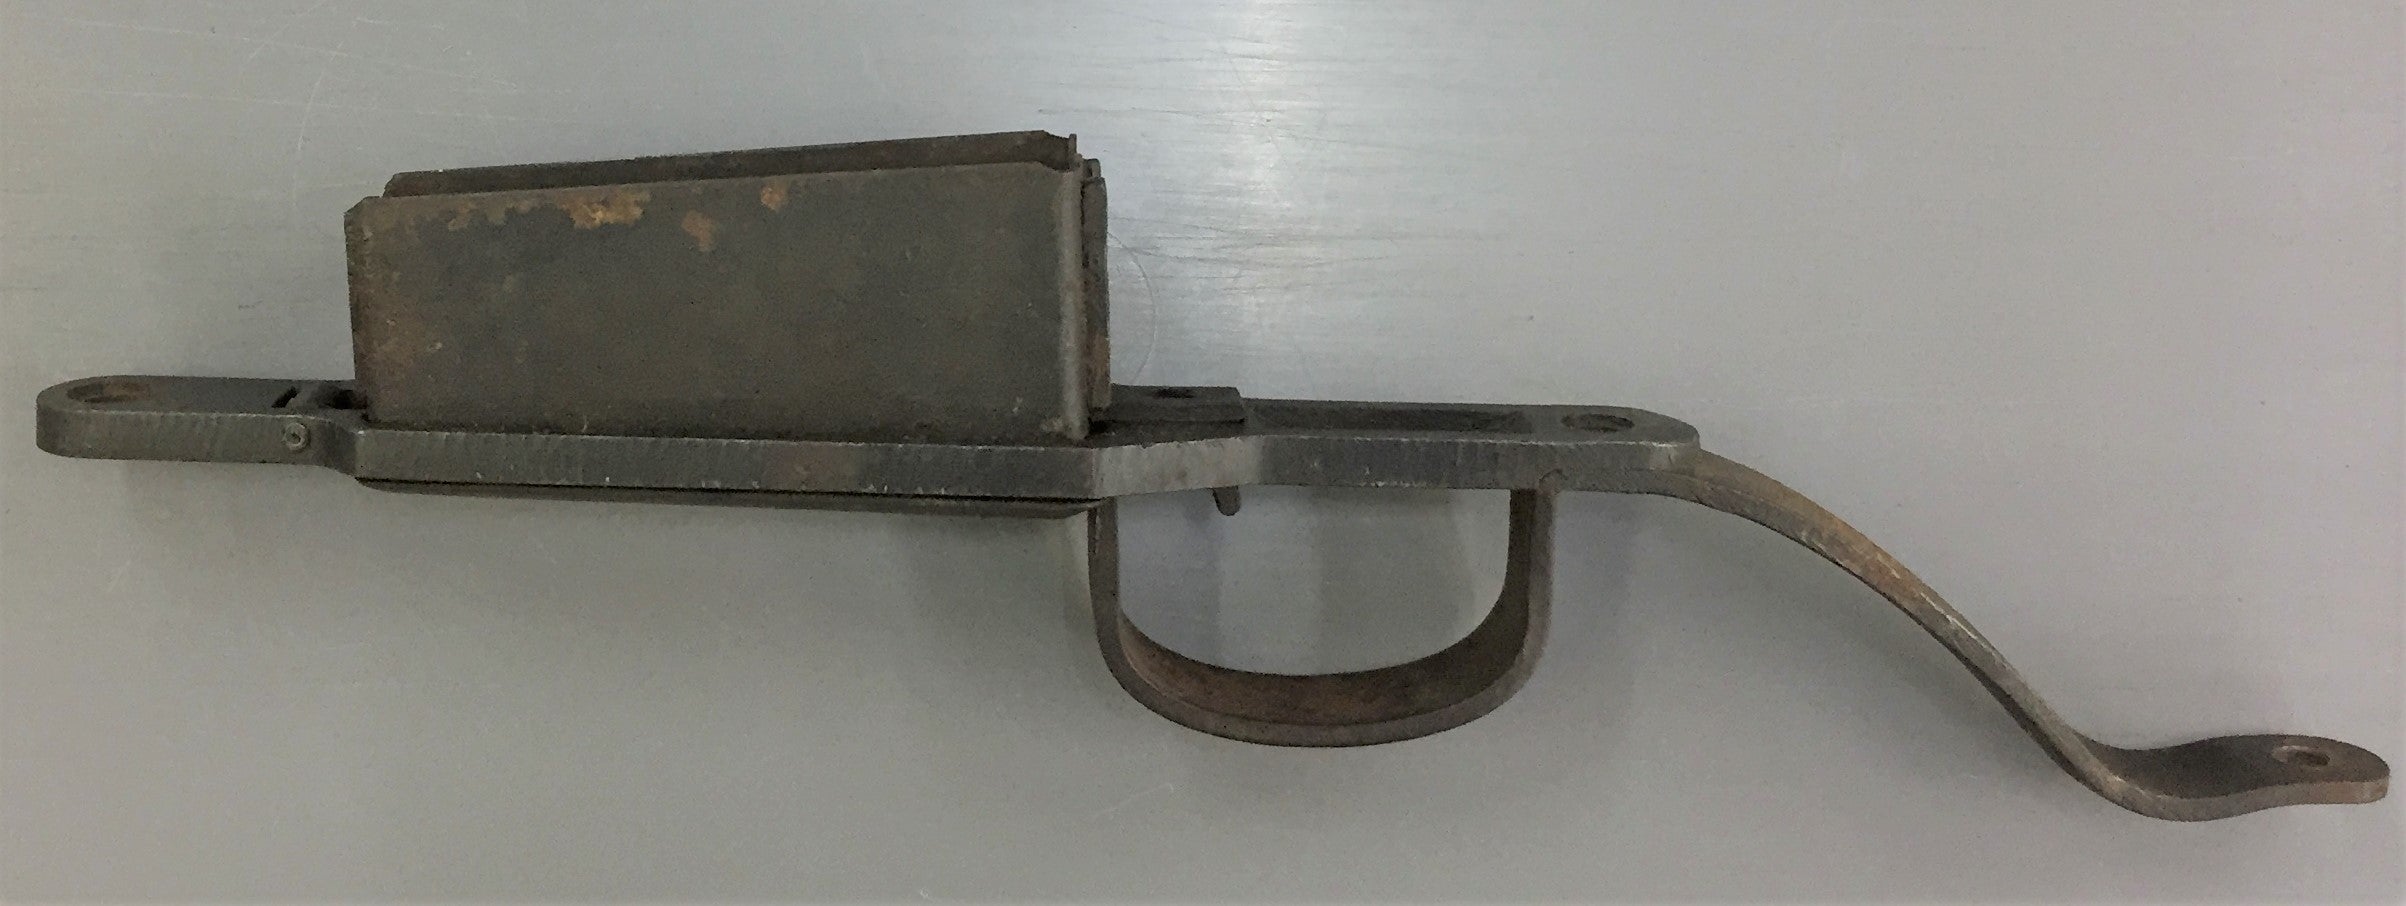 Arisaka Type 99 7.7 Jap Trigger Guard, Floor Plate Assembly with Mag Box (ARIS99H005)